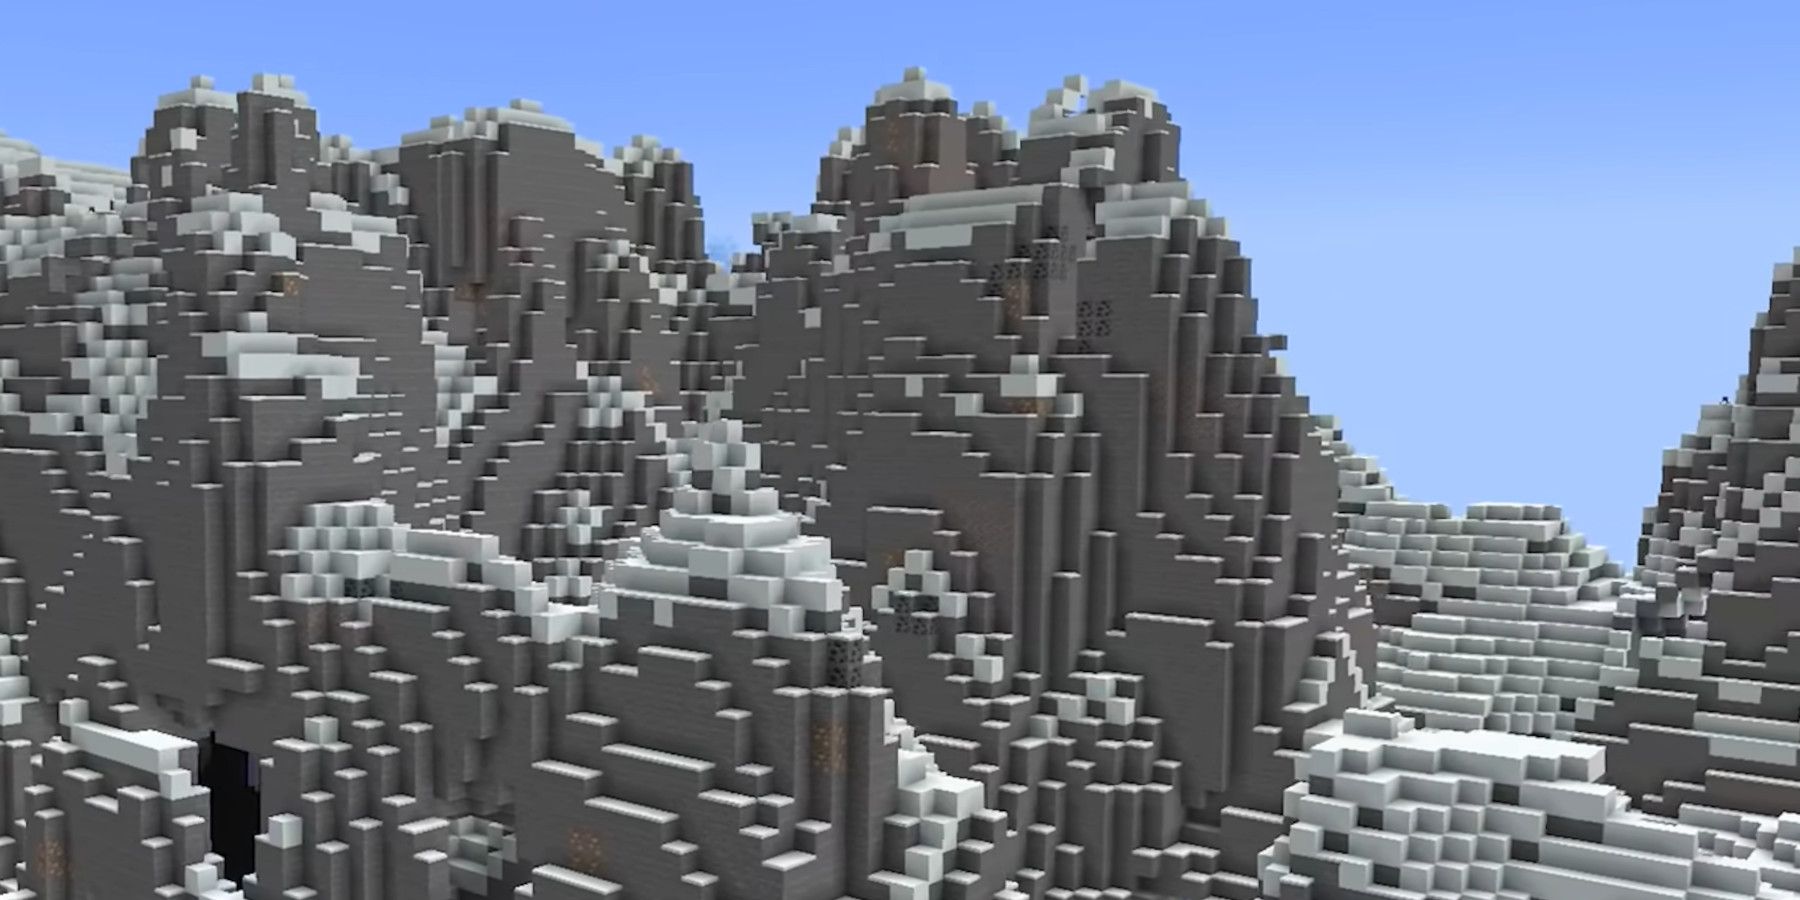 Tall snowy mountains in Minecraft Caves and Cliffs